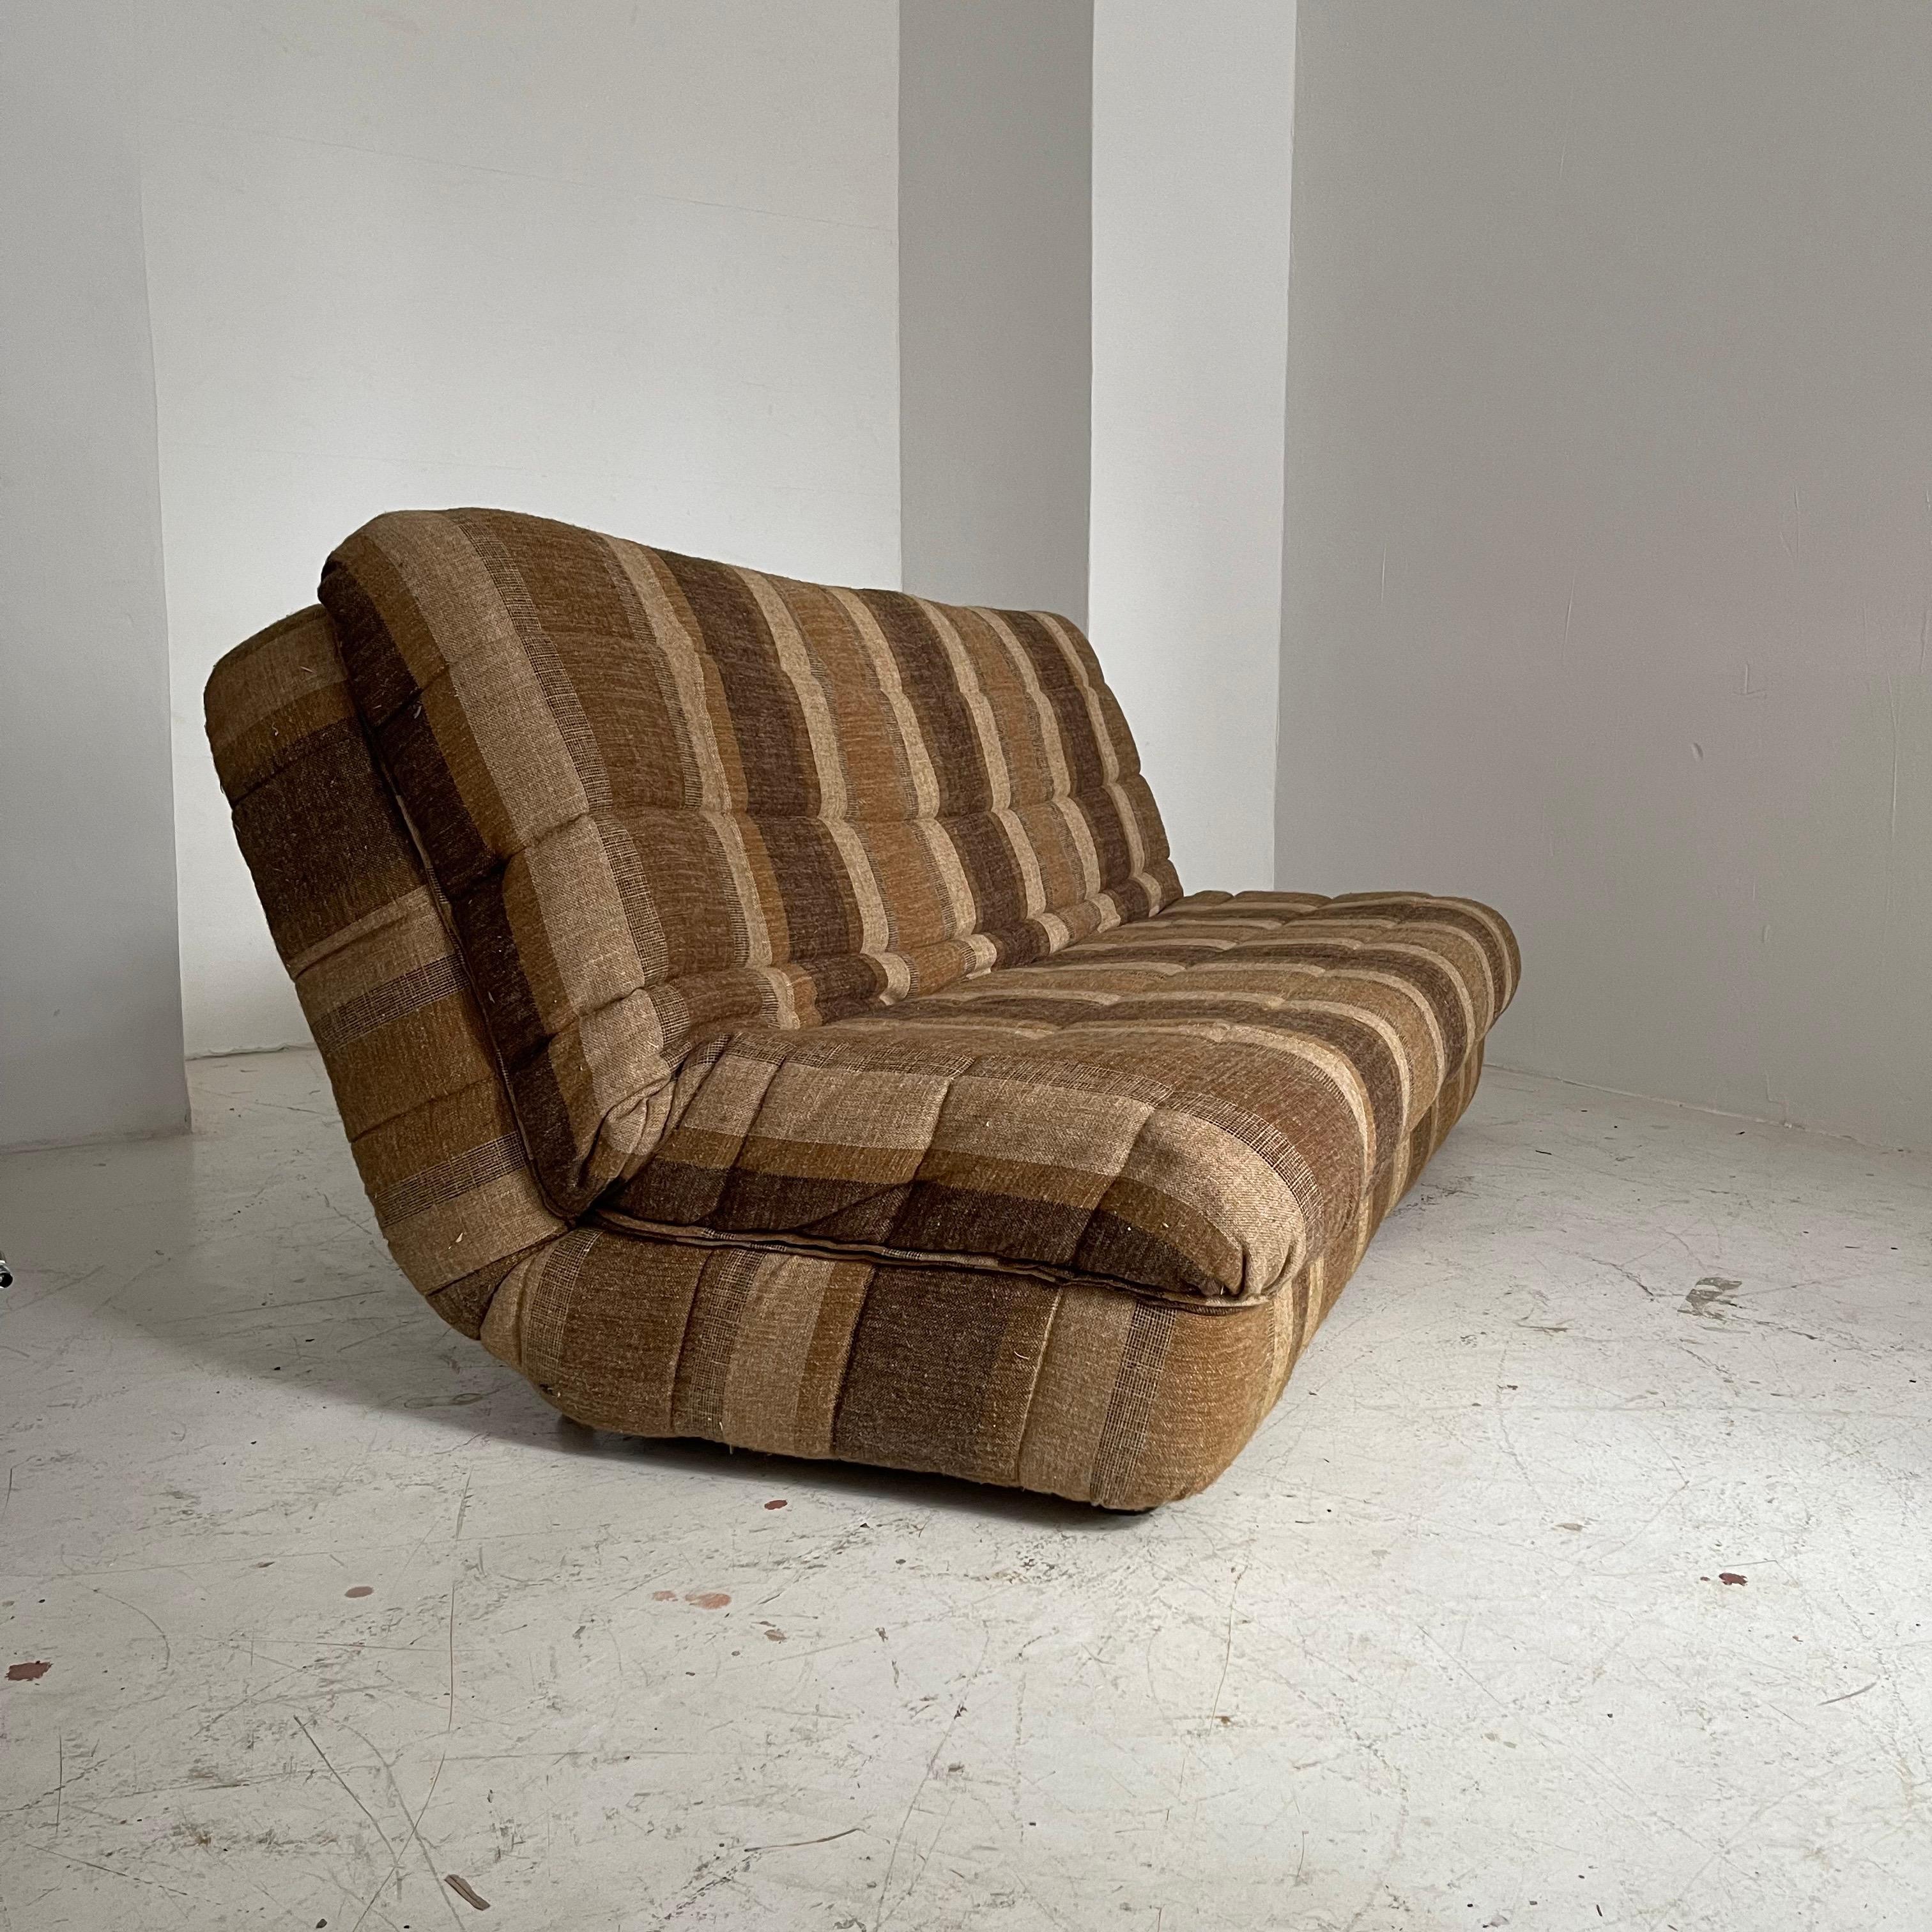 Cinna / Ligne Roset Daybed Lounge Chairs GAO Design Jean Paul Laloy, France 1975 For Sale 4